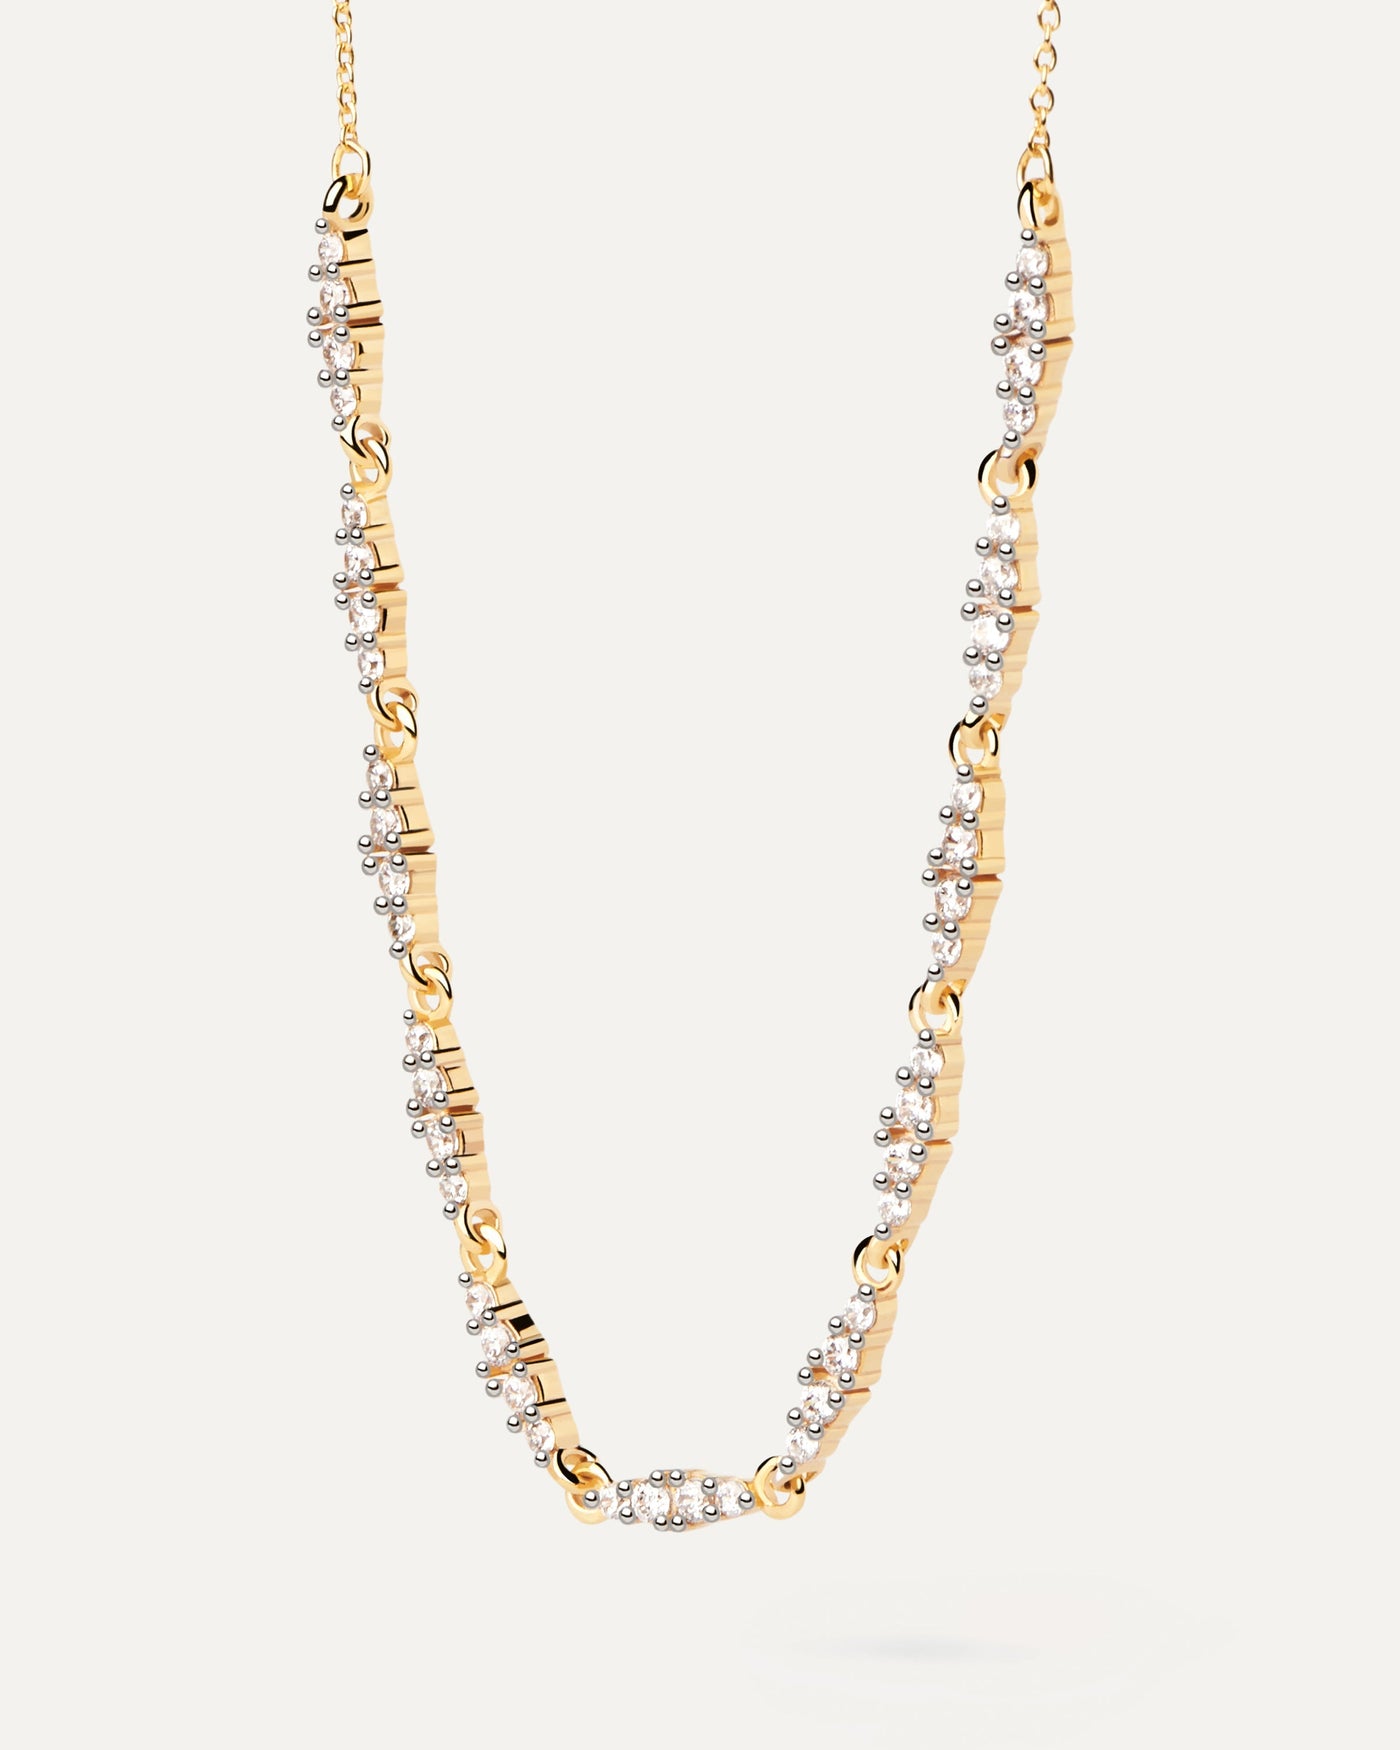 2023 Selection | Spice Necklace. Gold-plated chain necklace with eye shape multi-stone cluster links. Get the latest arrival from PDPAOLA. Place your order safely and get this Best Seller. Free Shipping.